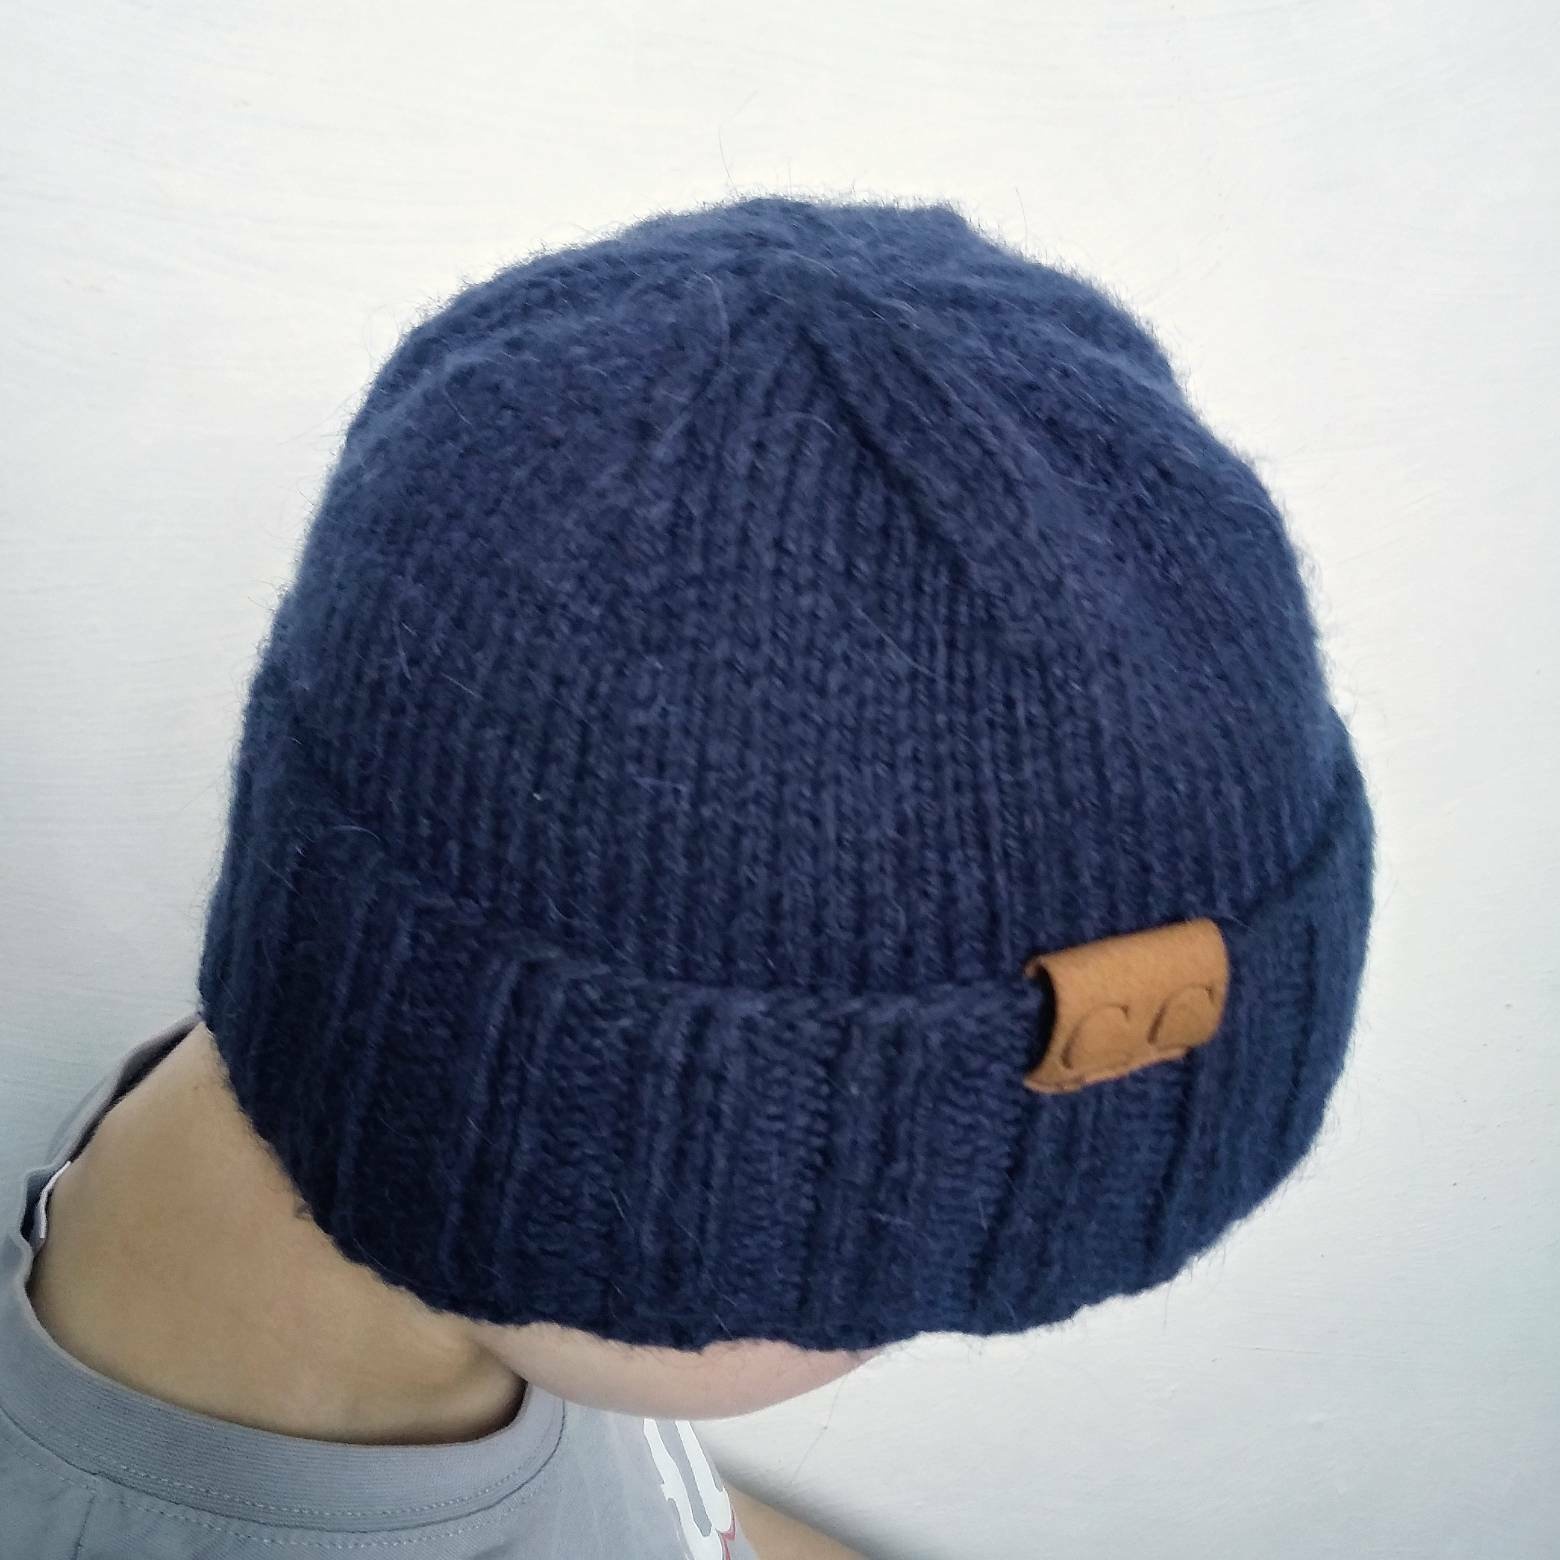 Knitted Mens Hat Patterns Pattern Knit Beanie Mens Knit Hats Patterns Knit Mens Beanies Patterns Pdf Pattern Mens Hat Knit Cap Boy Hat For Him